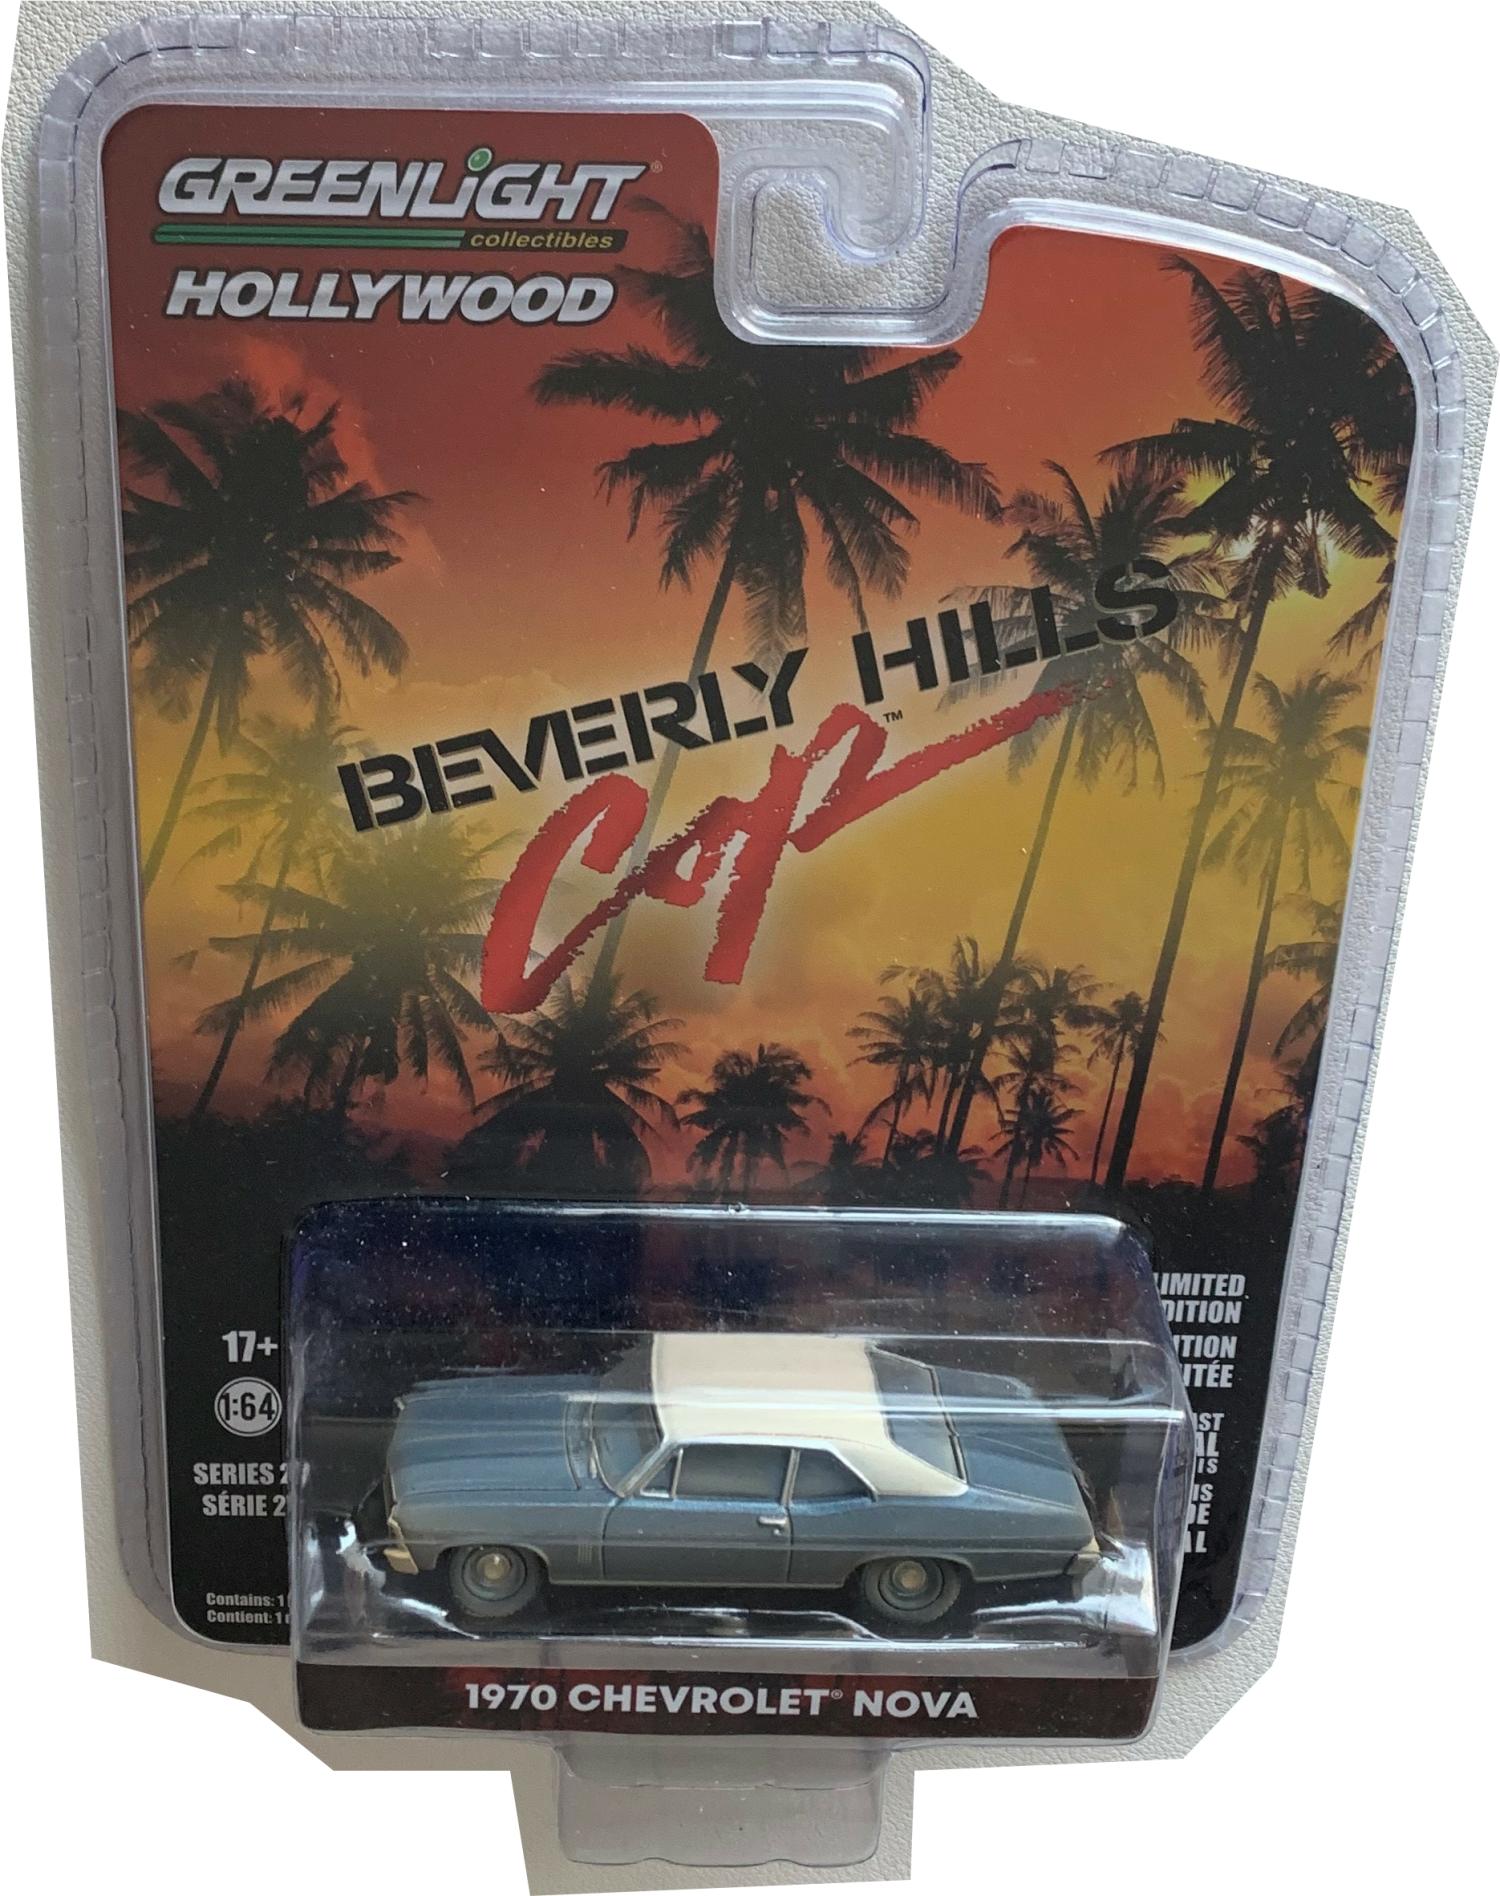 Beverly Hills Cop 1970 Chevrolet Nova in blue / white (unrestored) 1:64 scale model from Greenlight, limited edition